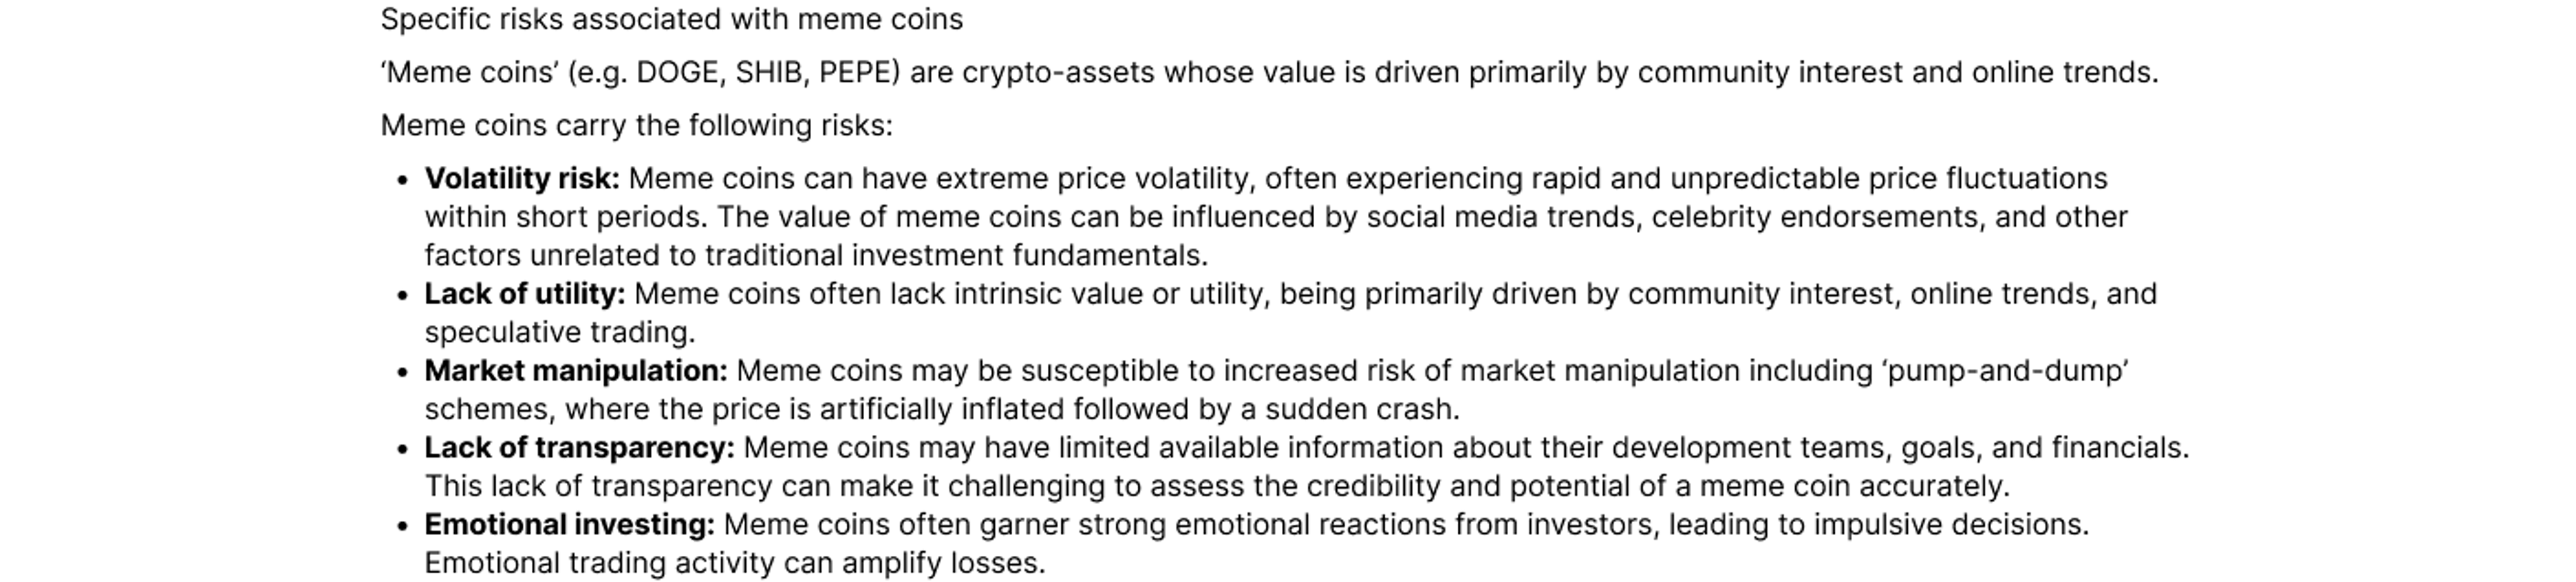 ‘Meme coins’ (e.g. DOGE, SHIB, PEPE) are crypto-assets whose value is driven primarily by community interest and online trends. Meme coins carry the following risks: Volatility risk: Meme coins can have extreme price volatility, often experiencing rapid a